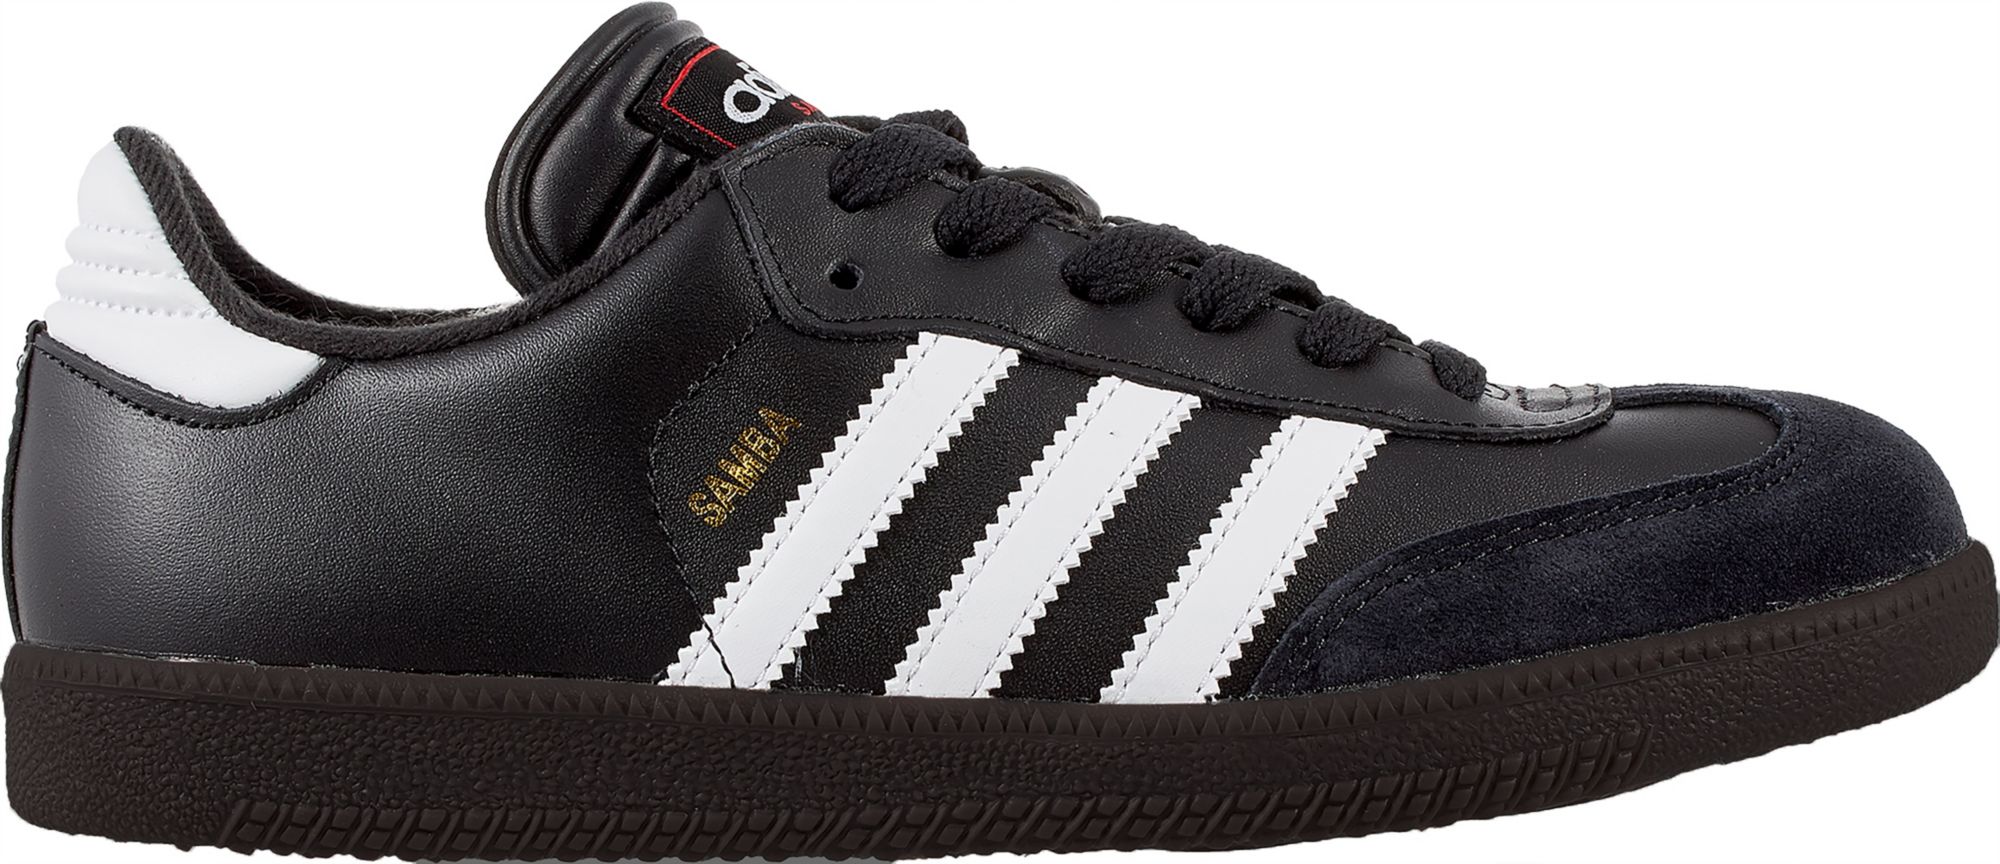 dick's sporting goods adidas shoes